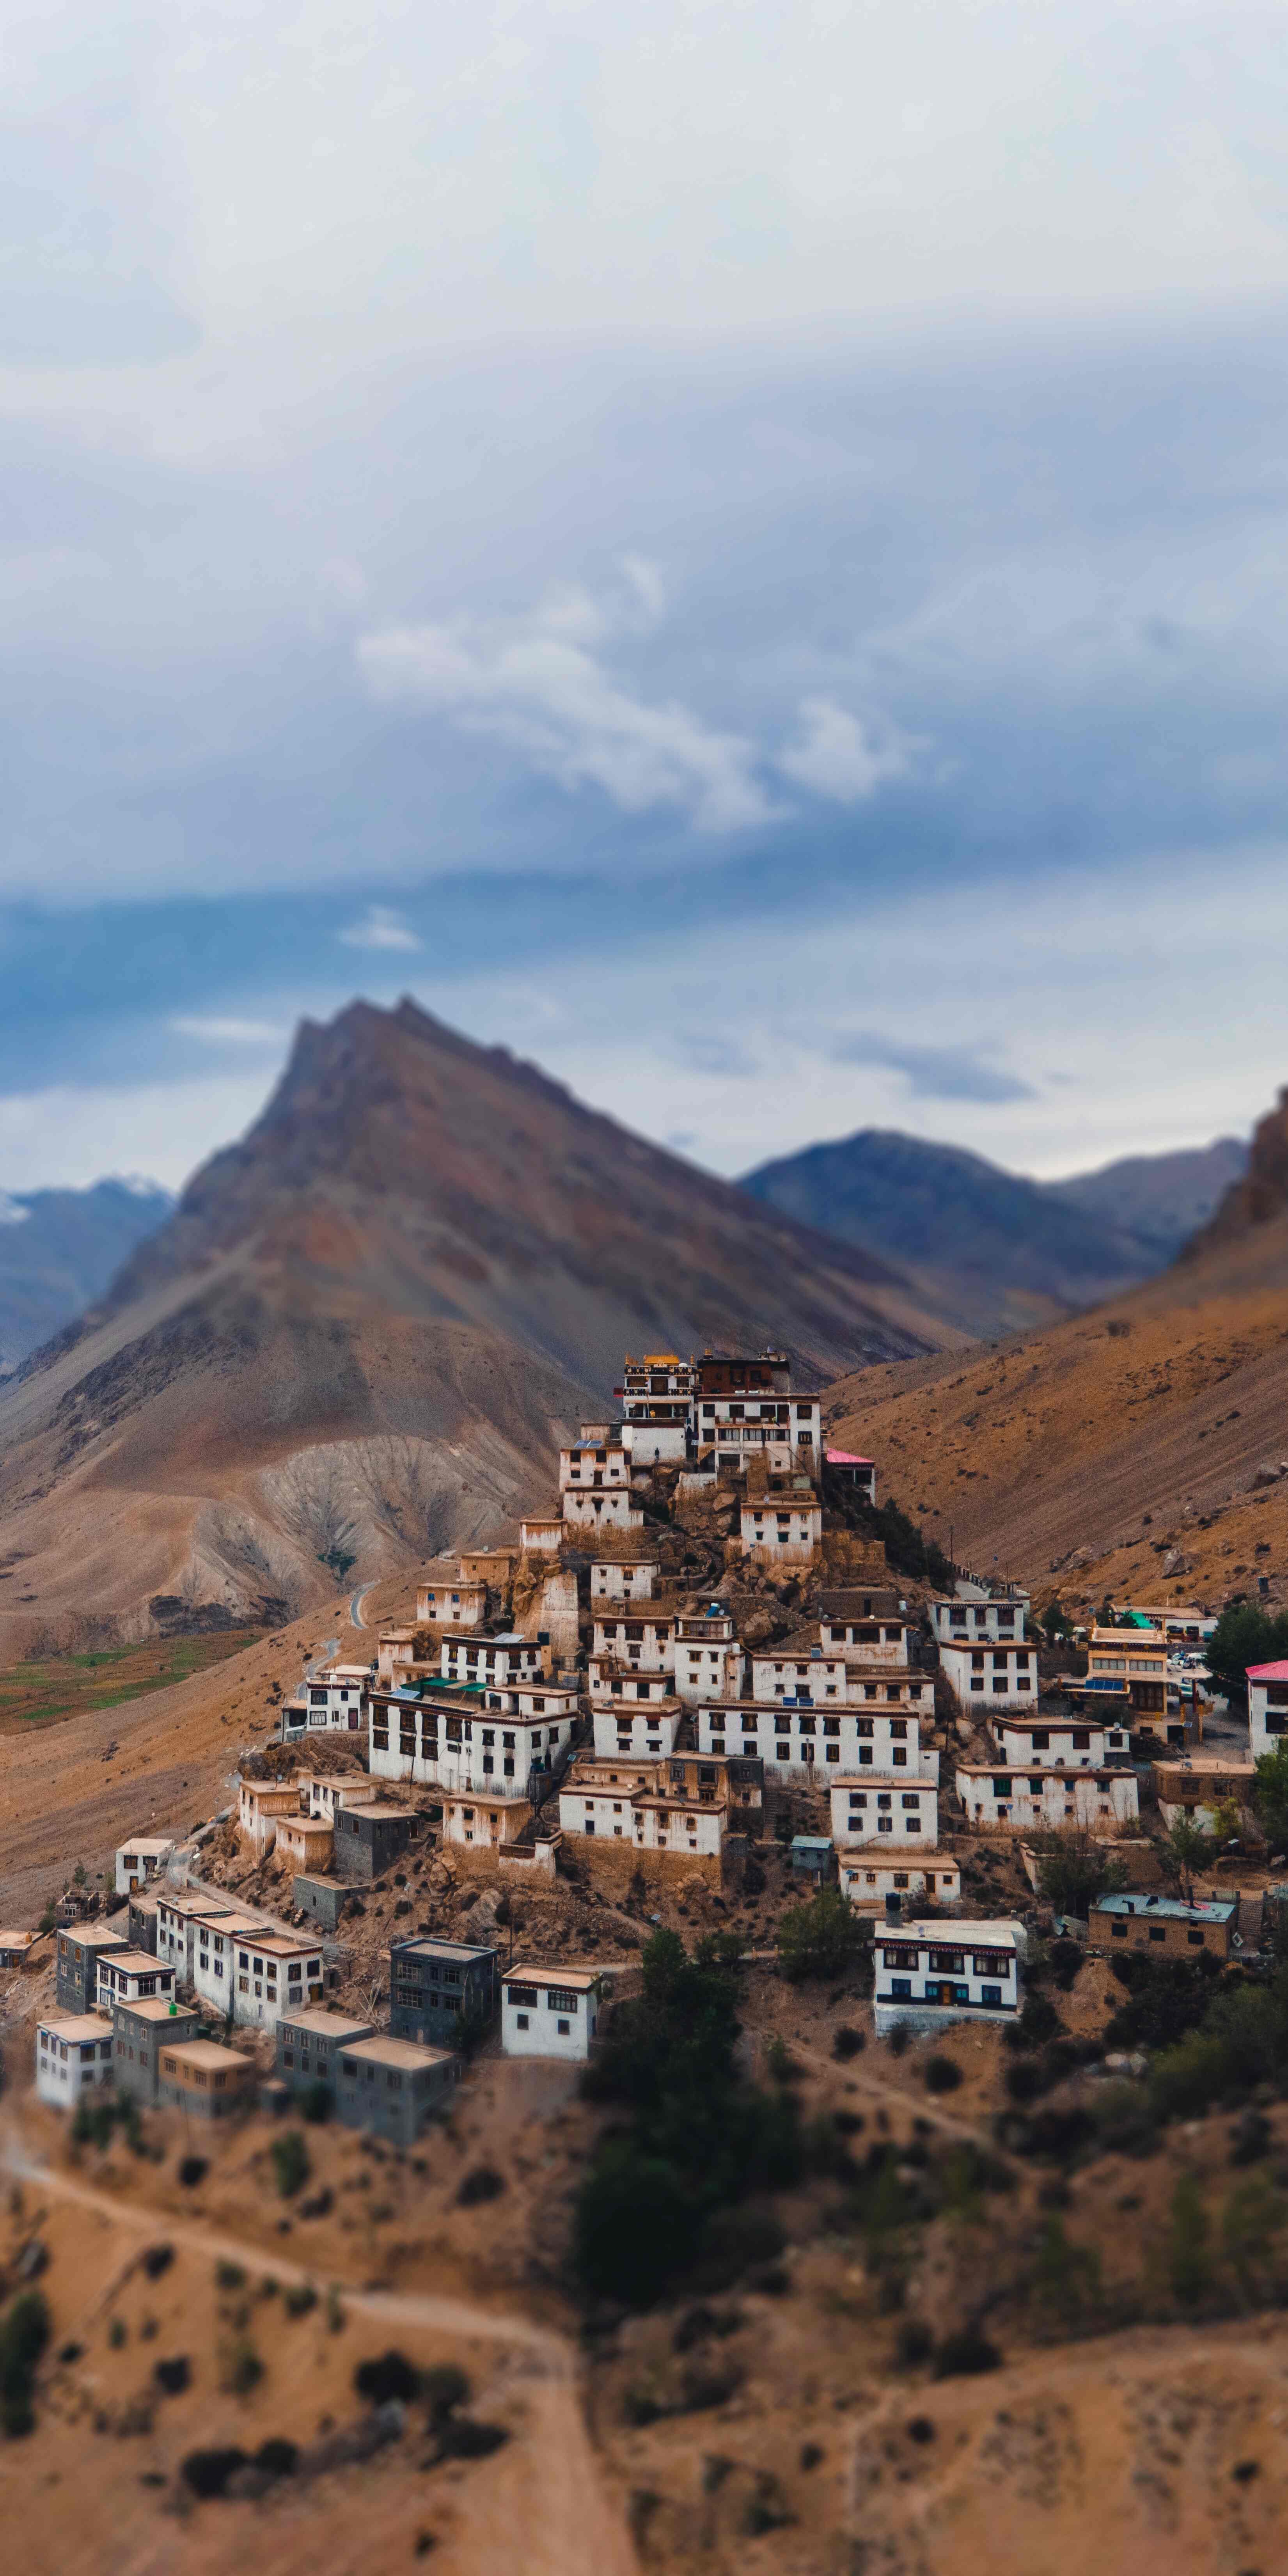 Conquer the Himalayan High: Spiti Valley Bike Tour - Ride through Ancient Monasteries and Surreal La